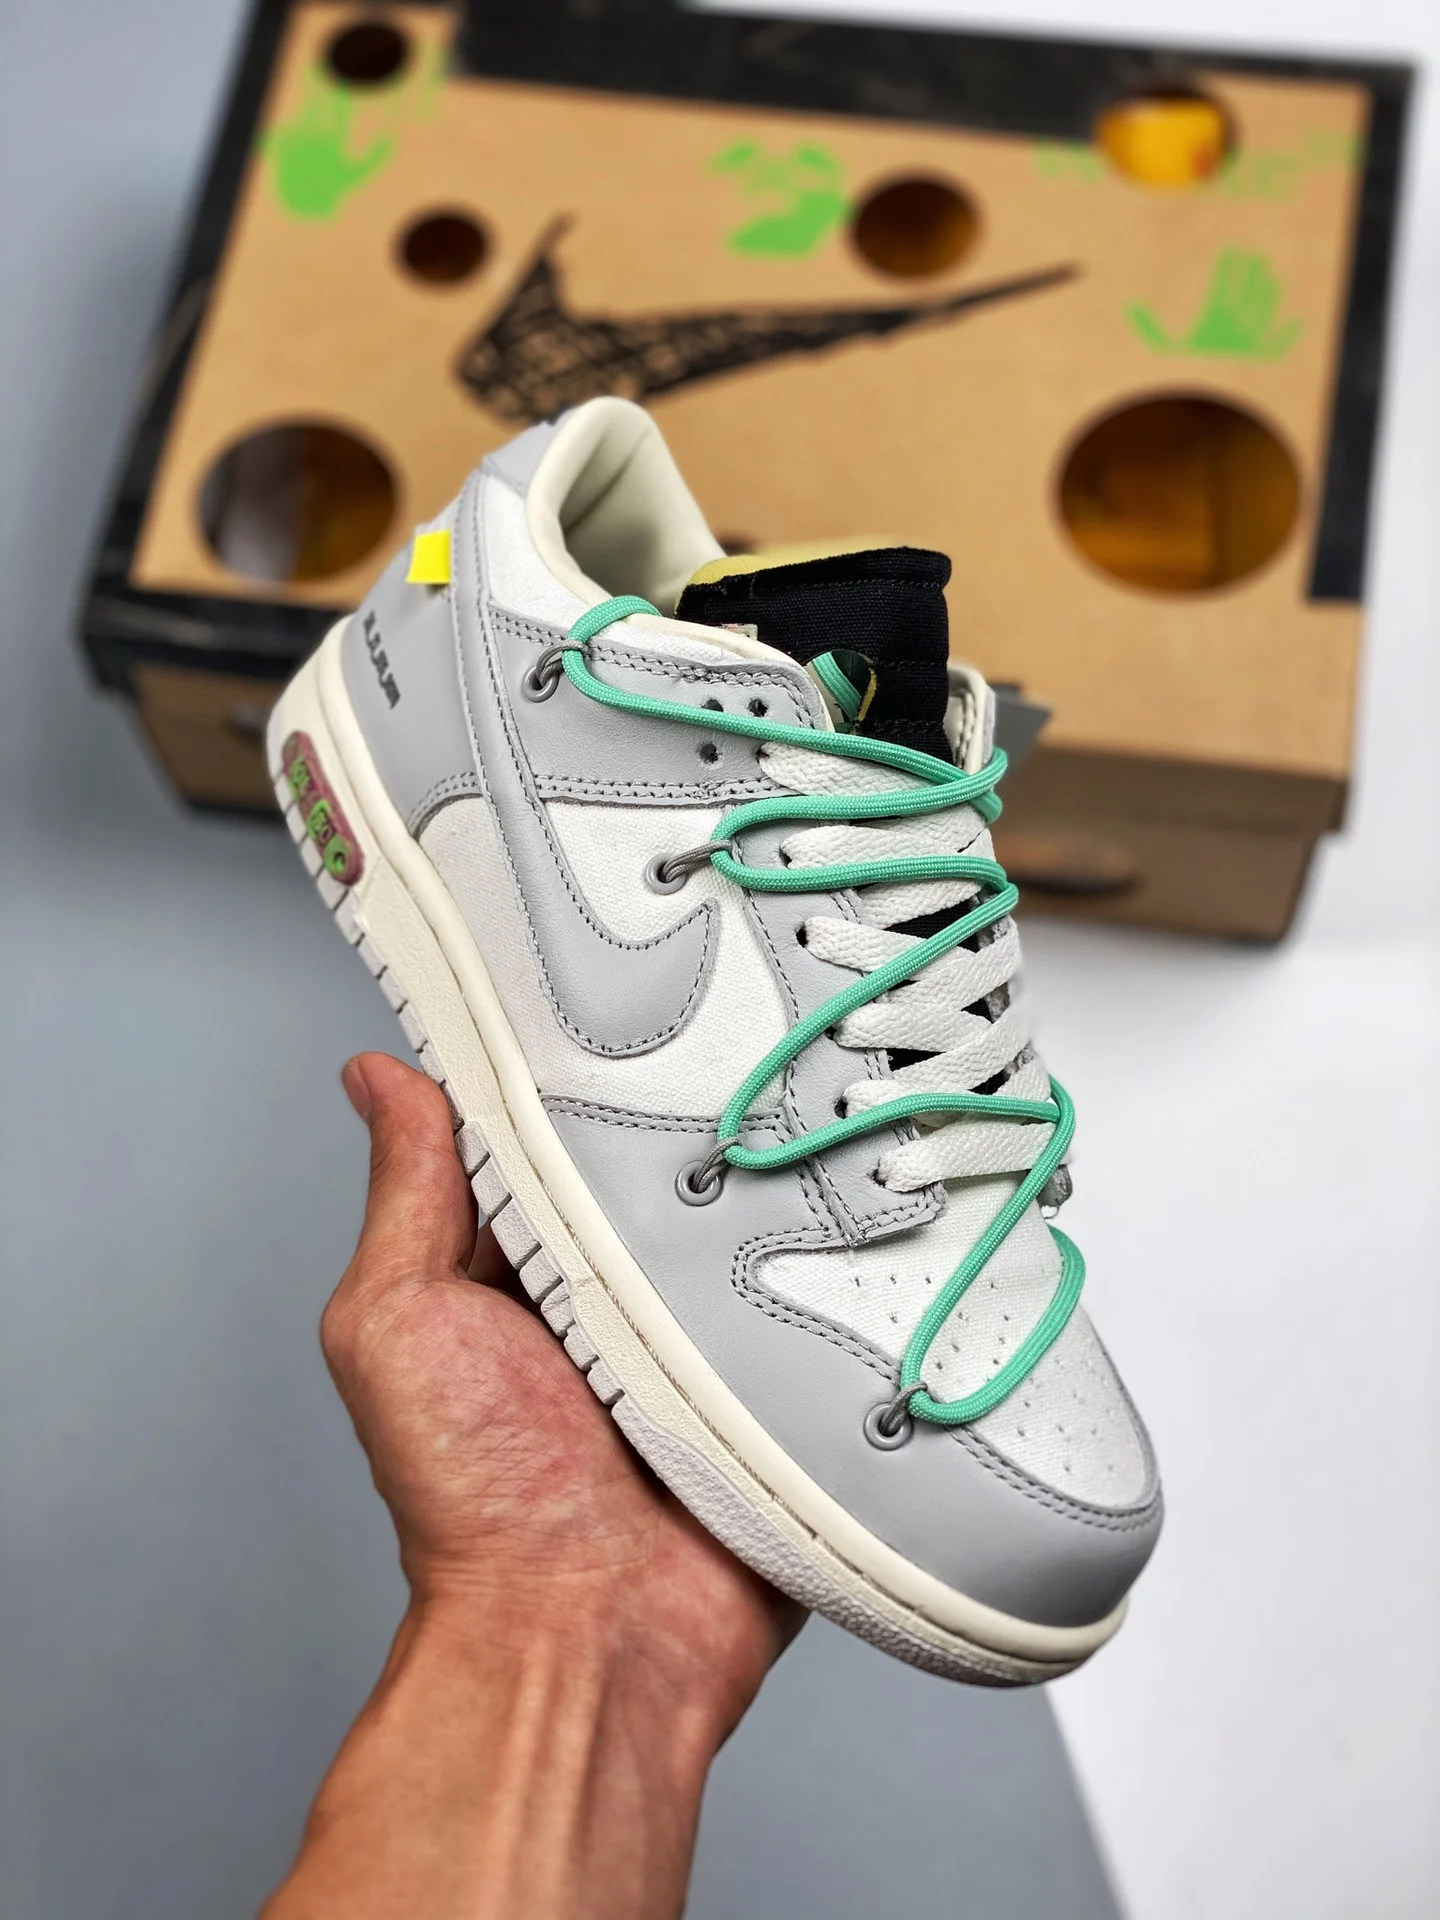 Off-White x Nike Dunk Low 04 of 50 Sail Grey Black For Sale